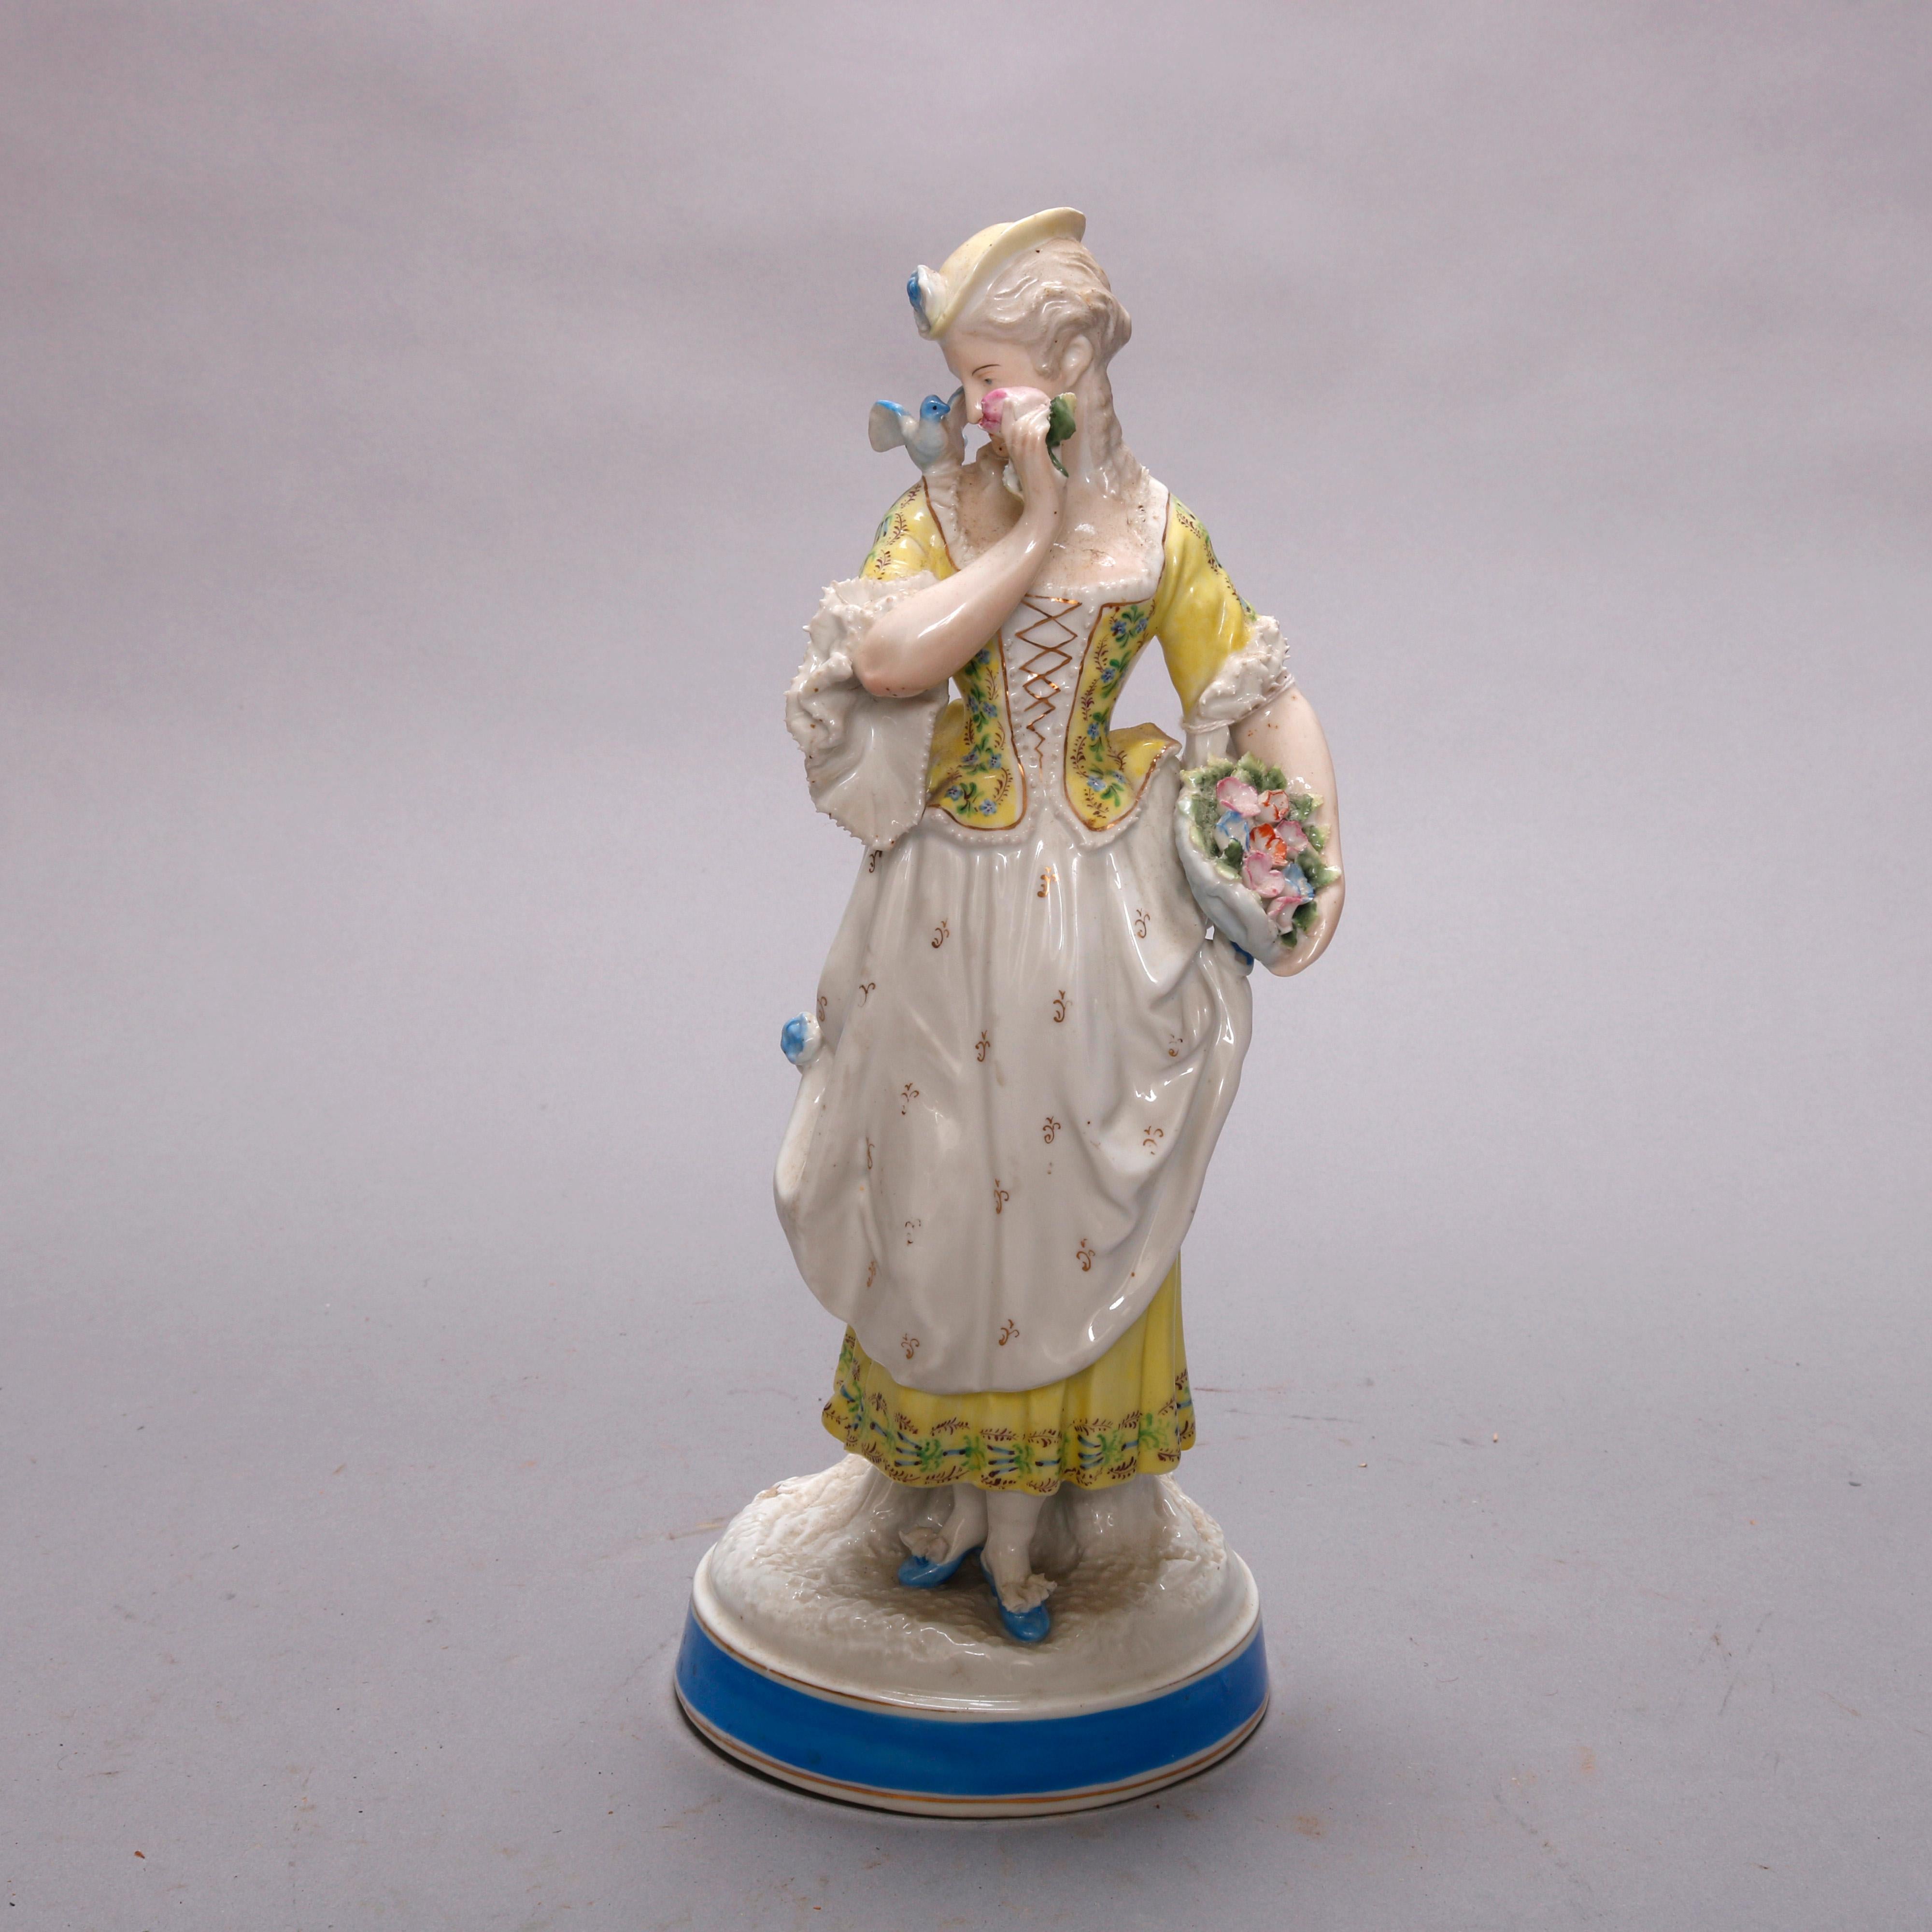 An antique German porcelain Meissen School figure depicts hand painted maiden in countryside setting, signed on base as photographed, circa 1900

 Measures: 12